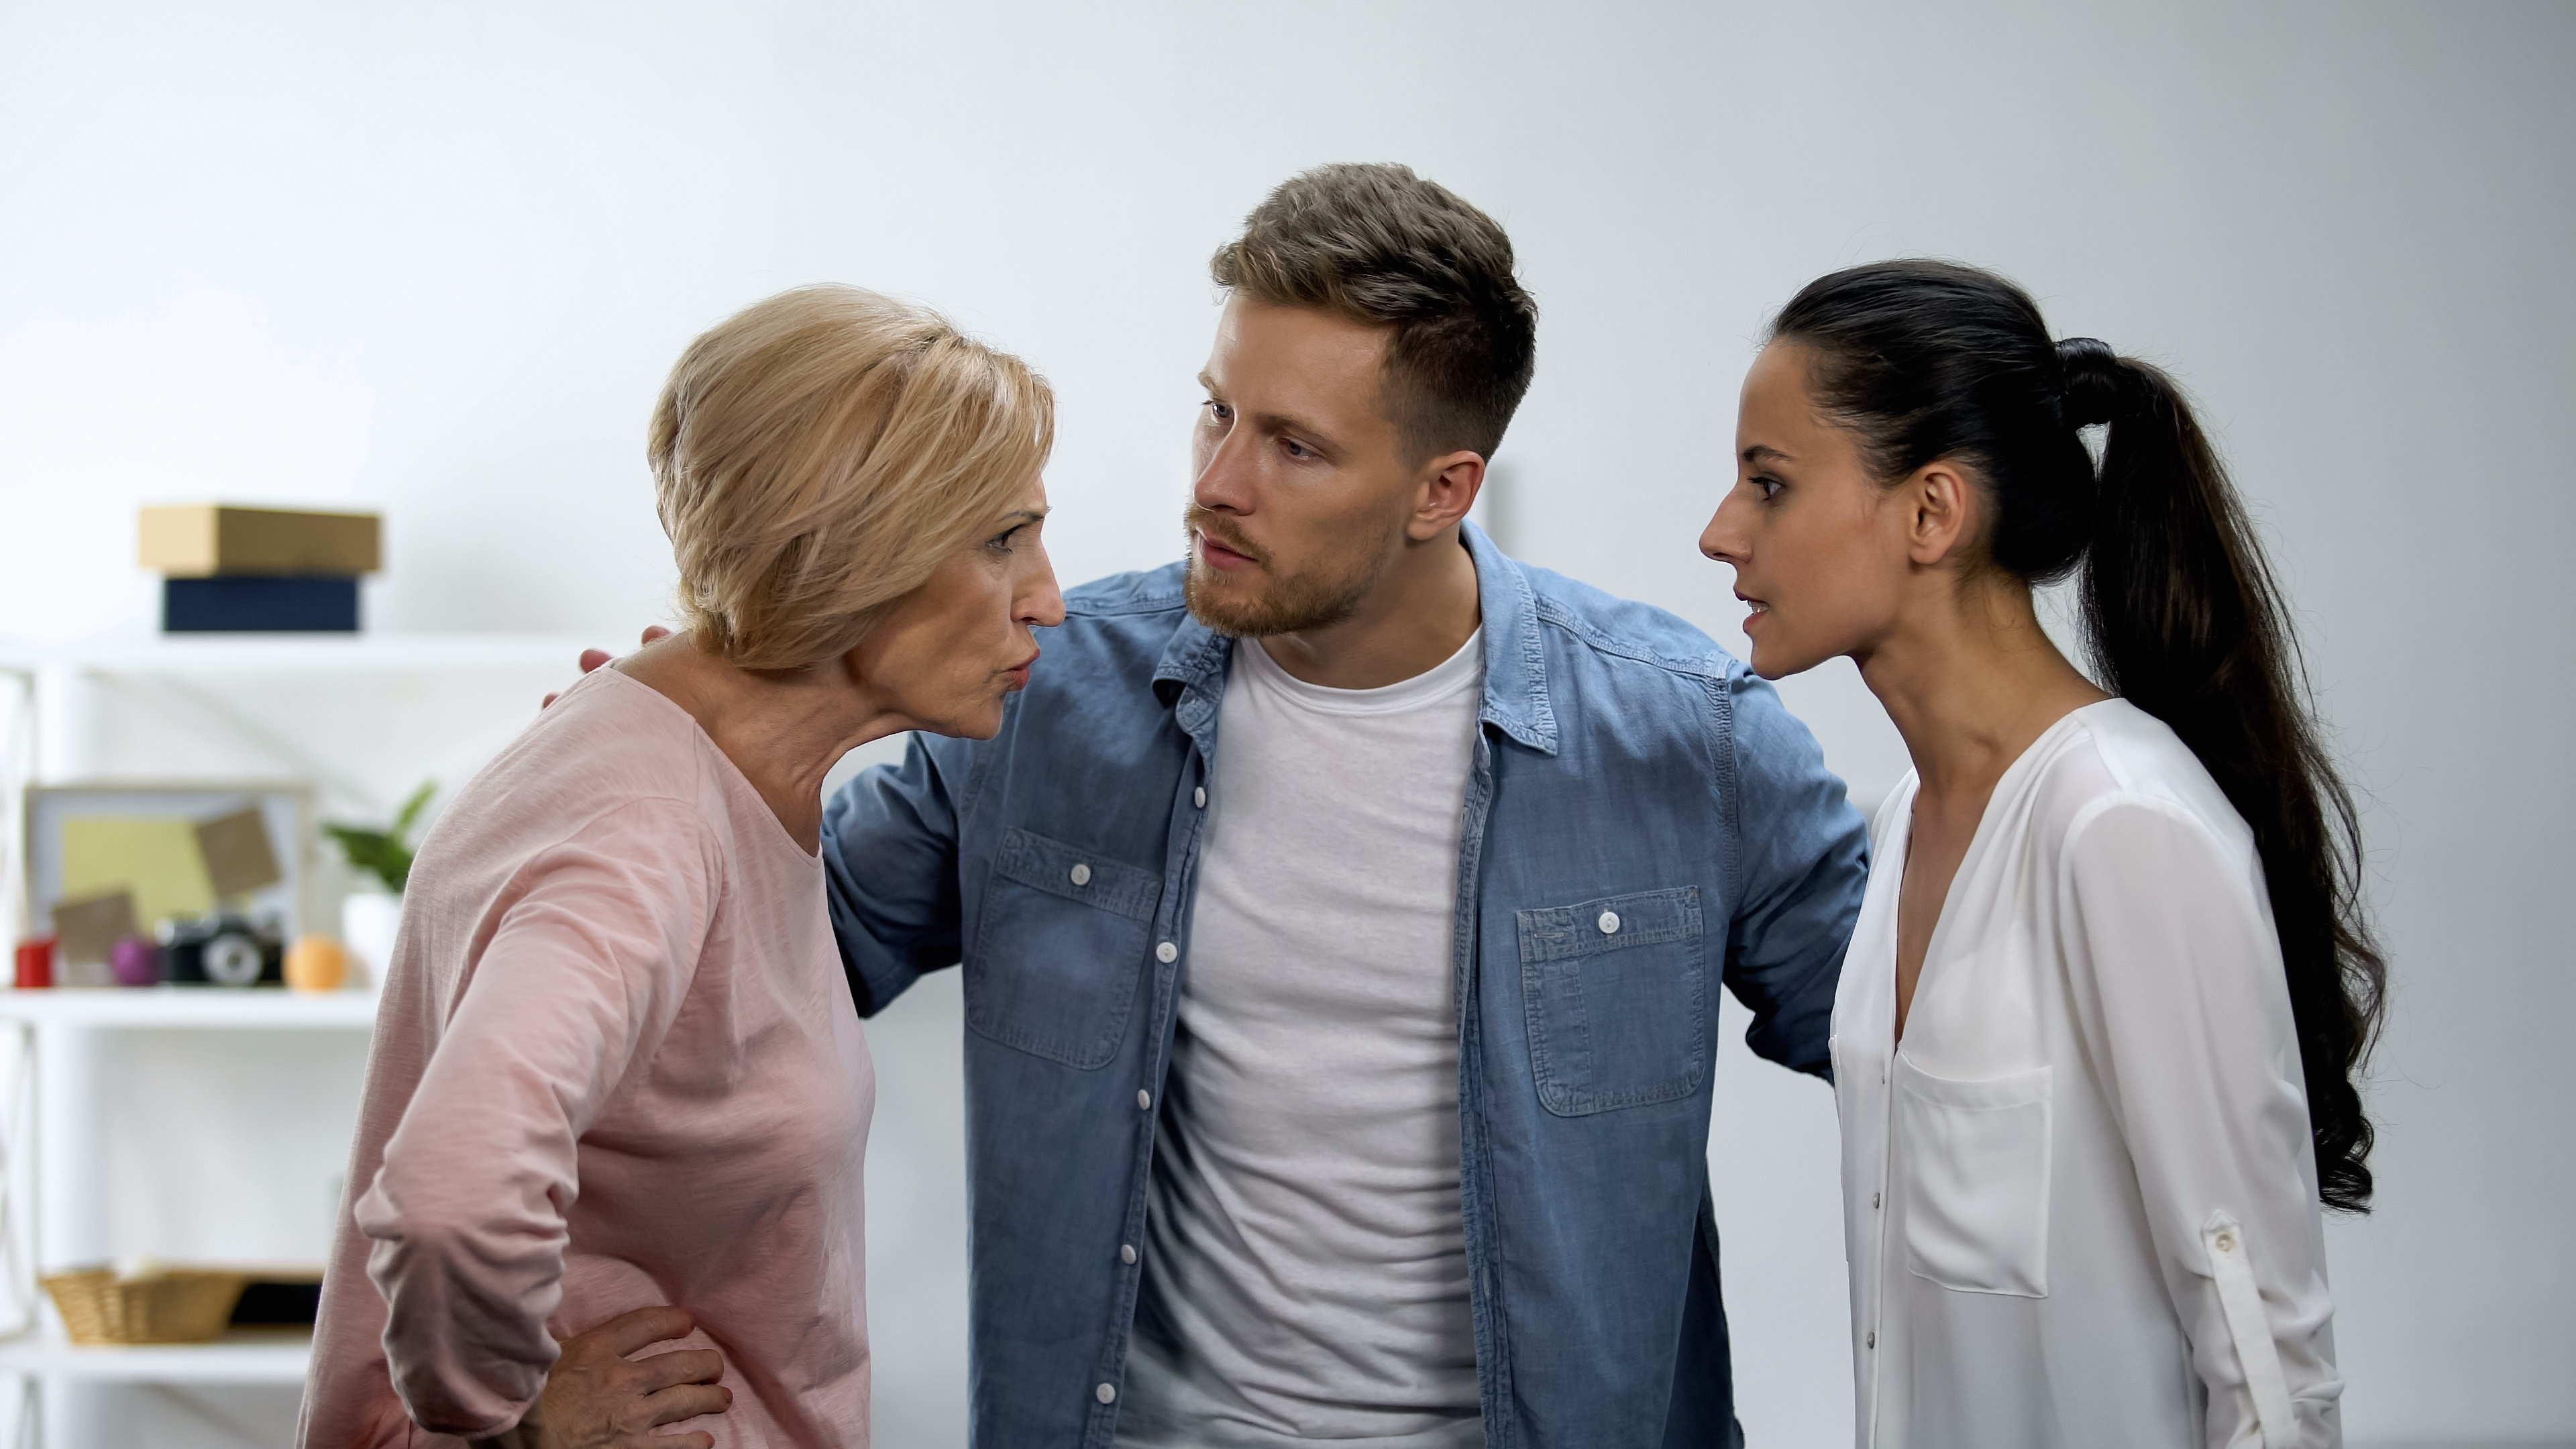 A man tries to calm a quarrel between his wife and mother | Source: Shutterstock